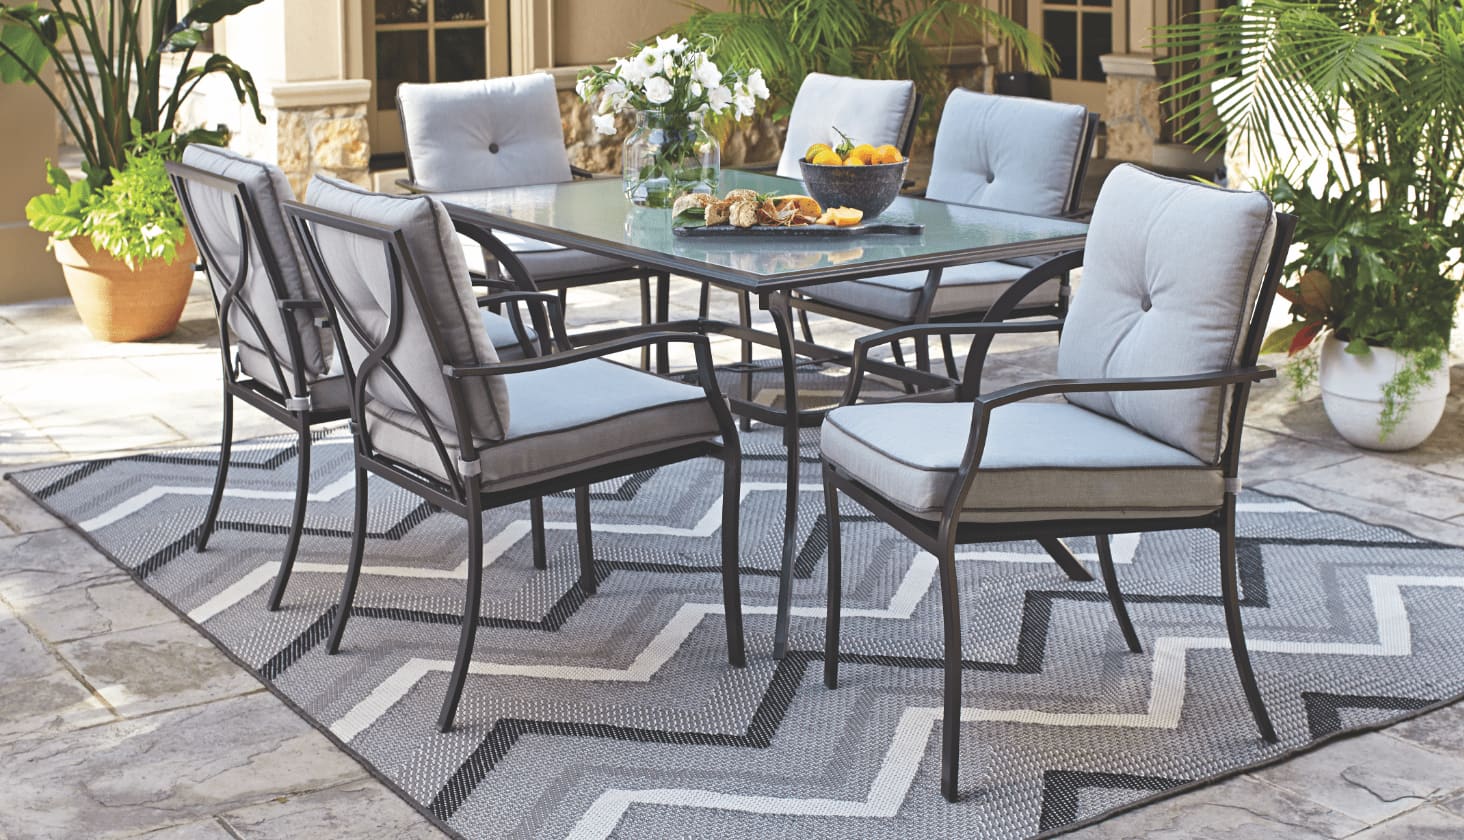 A For Living Bluebay Glass Table with 6 Bluebay Padded Dining Chairs and an outdoor rug on a patio.